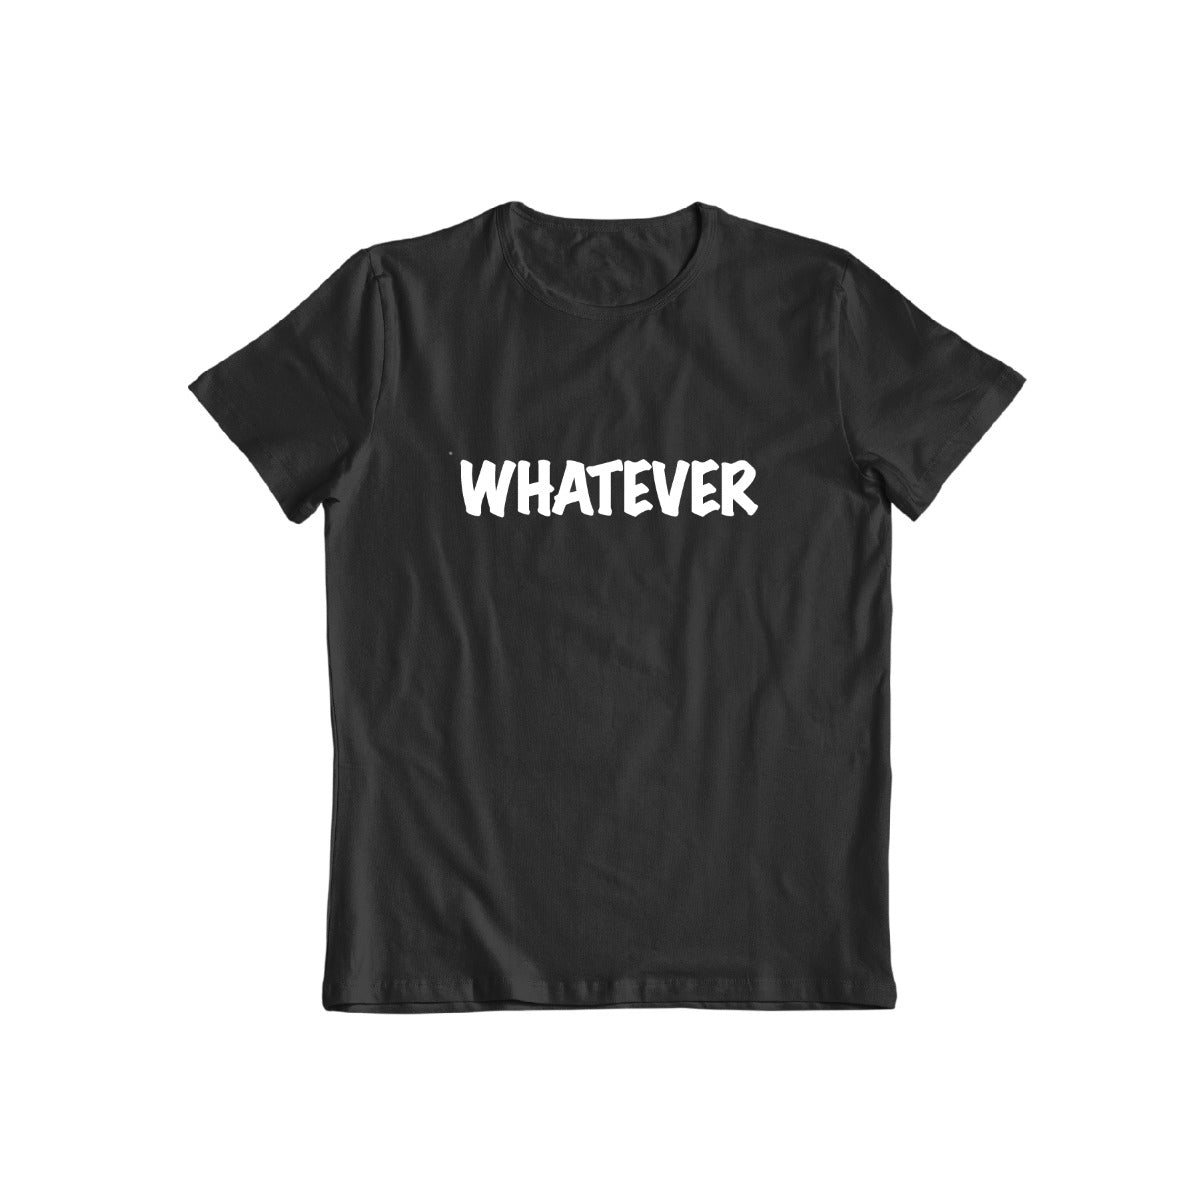 Whatever T-Shirt for Men and Women / Black / Large